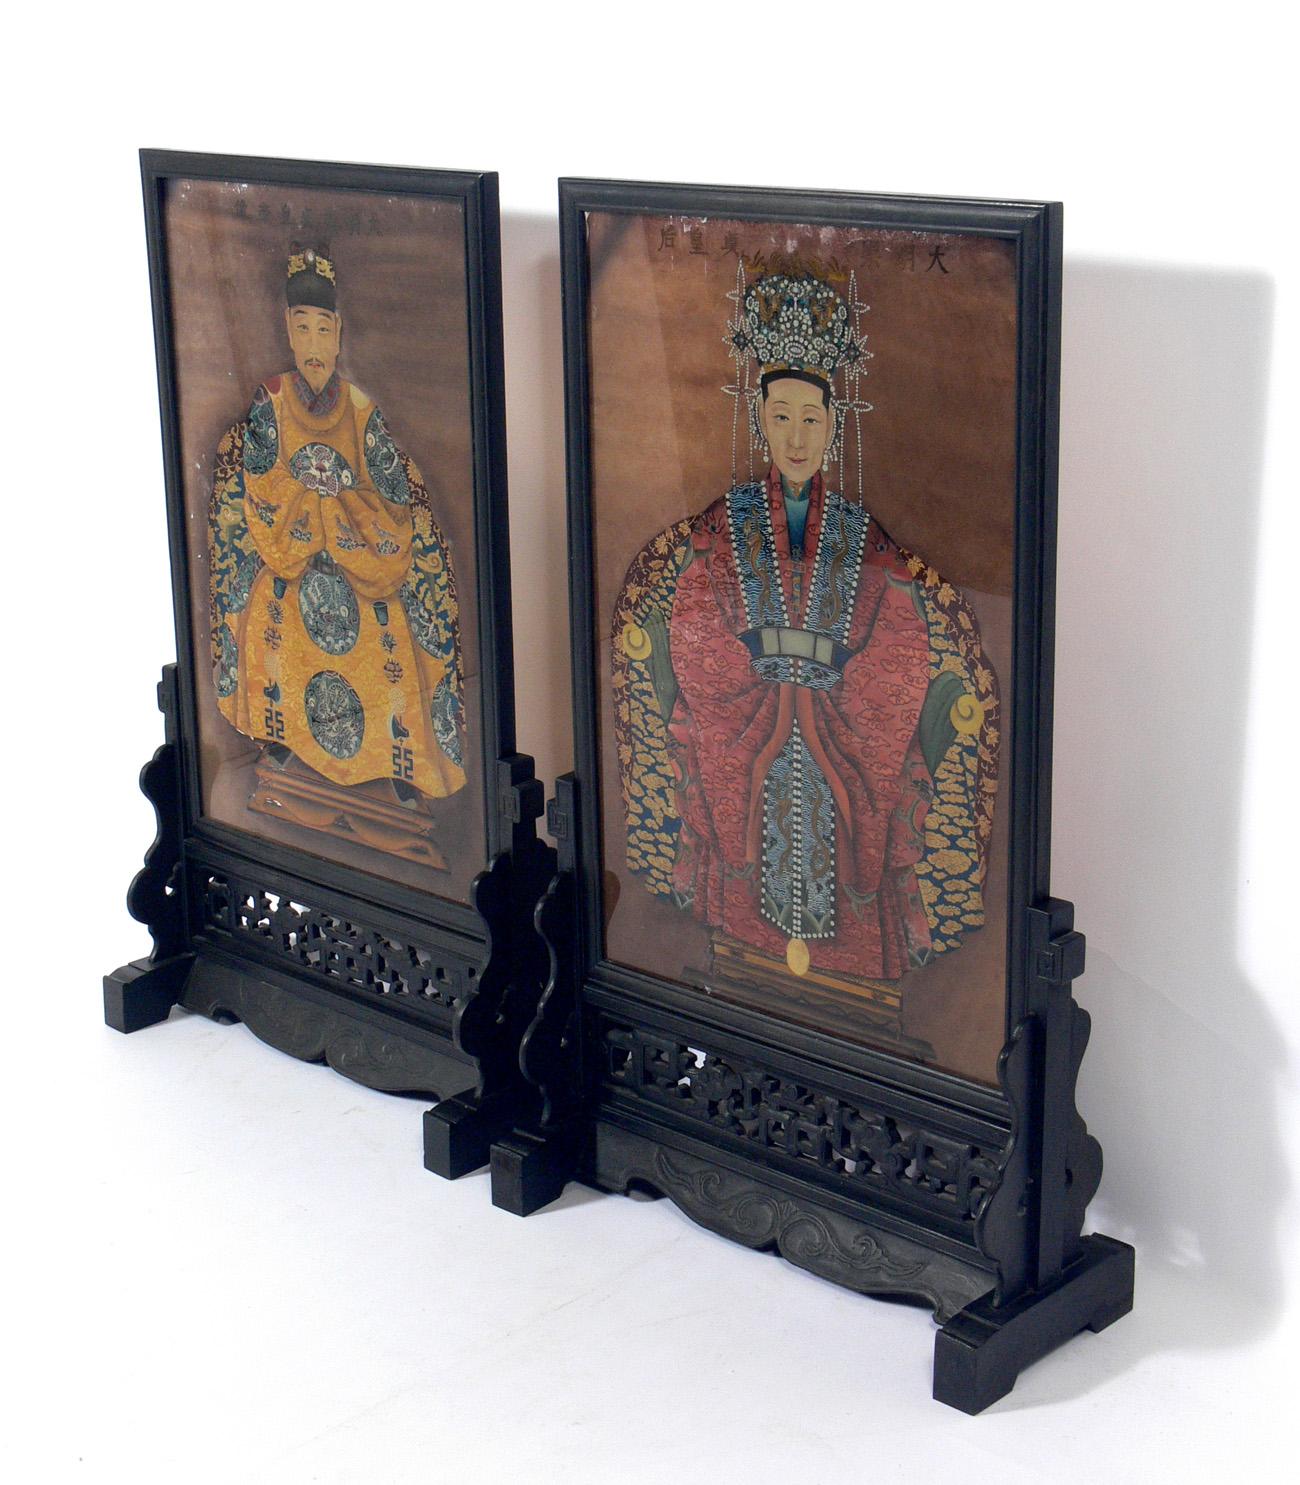 Chinese ancestral reverse paintings on glass, China, 20th century. We are unsure of the age on these. Probably mid-20th century, possibly much earlier. They retain their original hand carved wood stands. One glass has a crack at the bottom right,